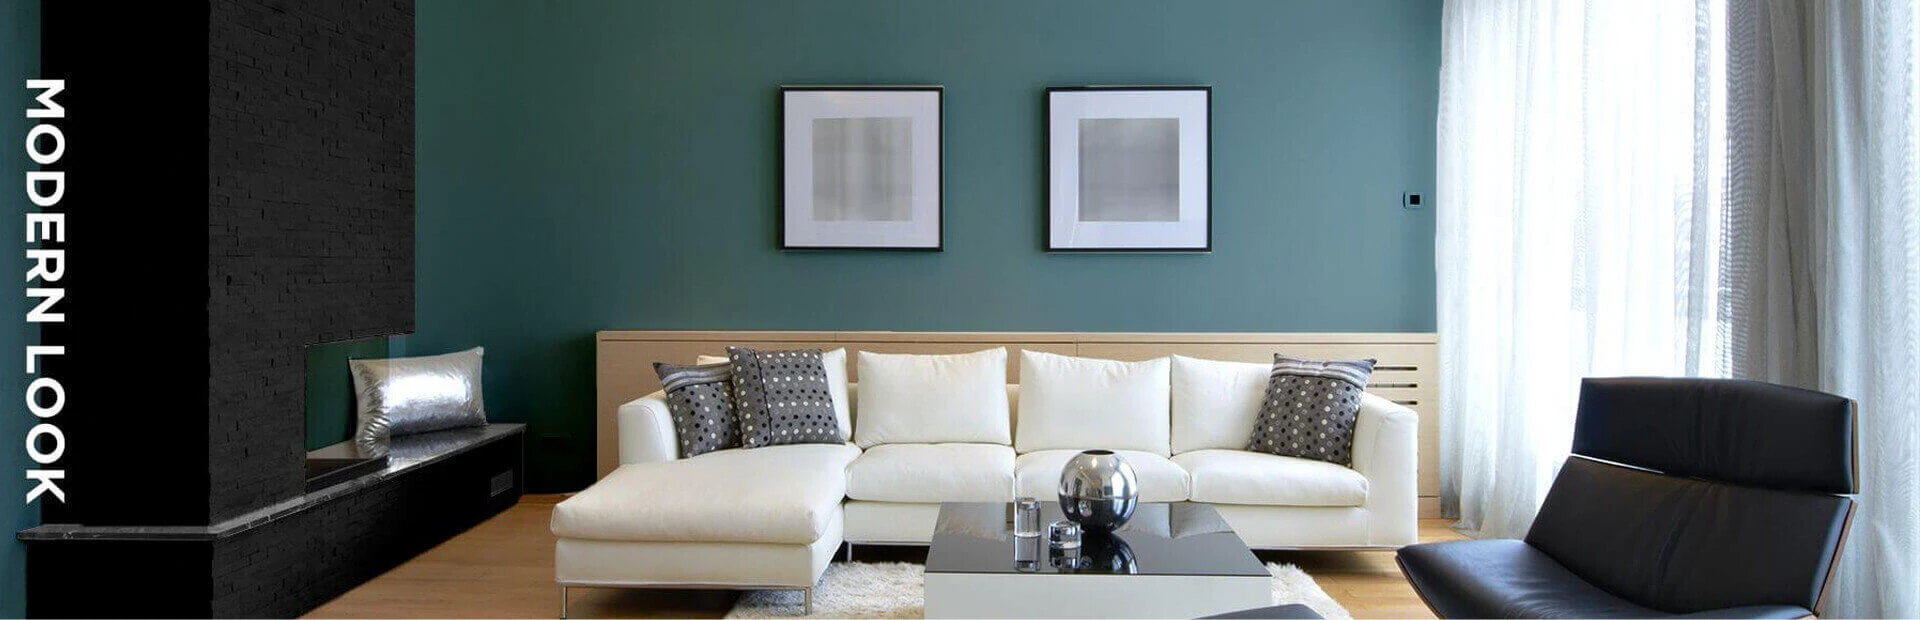 Living Room in shades of taupe, forest green and tan featuring furniture and paintings on walls.